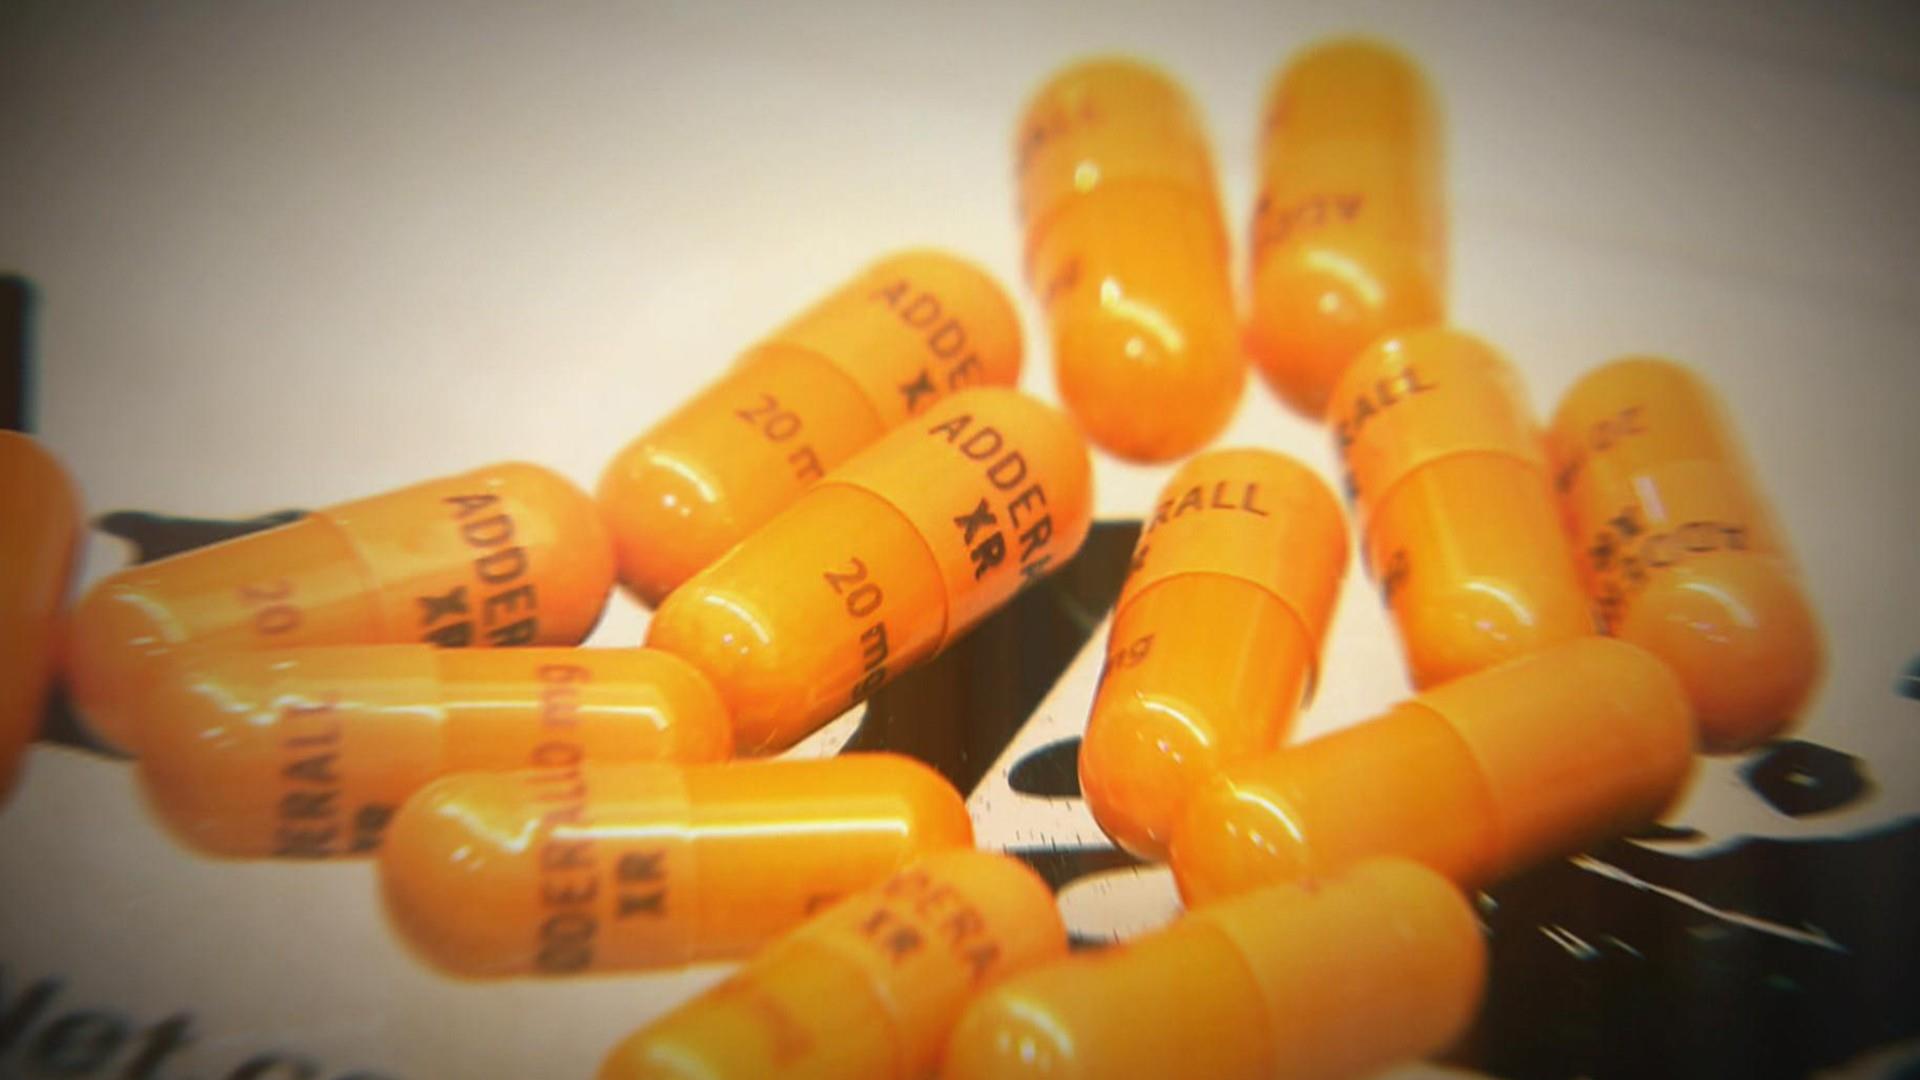 Smart drug' abuse is focus of Netflix documentary 'Take Your Pills ...